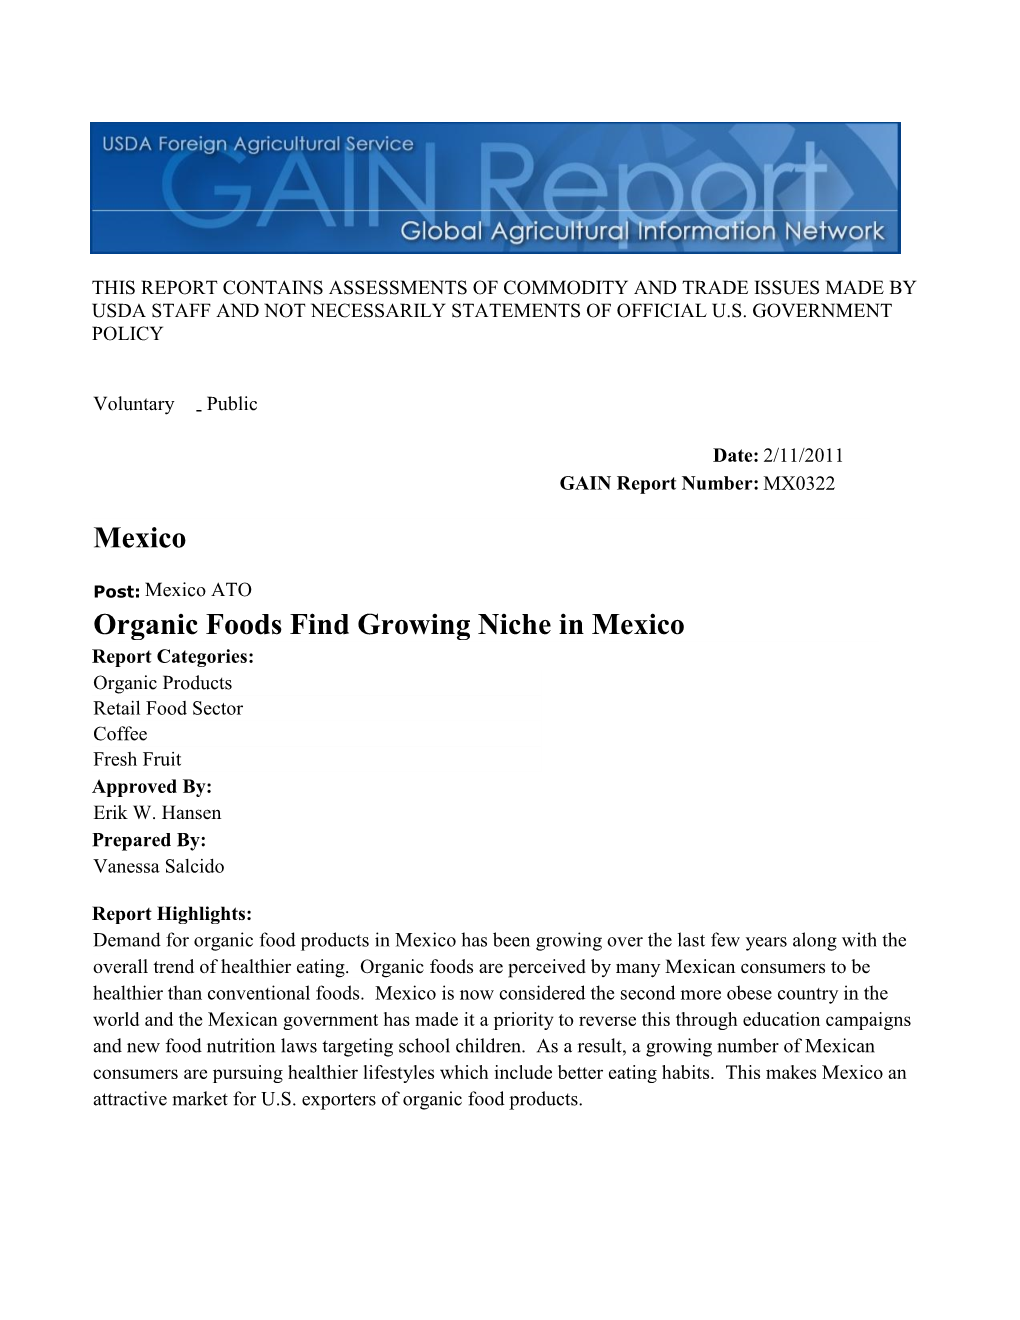 Organic Foods Find Growing Niche in Mexico Mexico